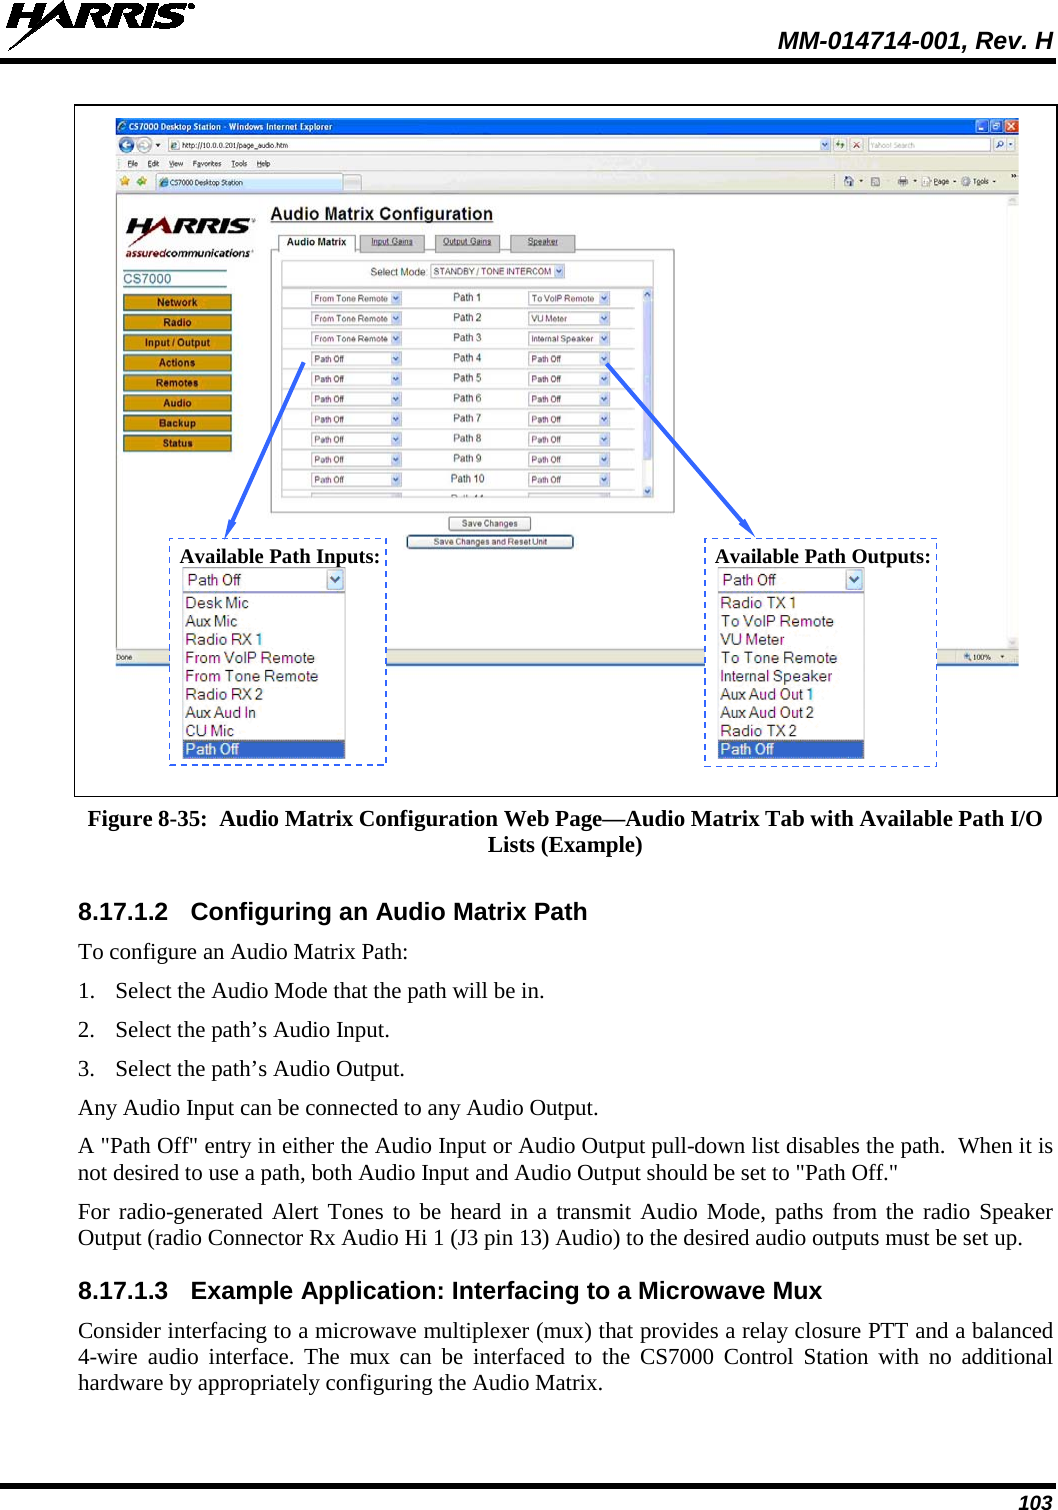  MM-014714-001, Rev. H 103   Figure 8-35:  Audio Matrix Configuration Web Page—Audio Matrix Tab with Available Path I/O Lists (Example)  8.17.1.2 Configuring an Audio Matrix Path To configure an Audio Matrix Path: 1. Select the Audio Mode that the path will be in. 2. Select the path’s Audio Input. 3. Select the path’s Audio Output. Any Audio Input can be connected to any Audio Output. A &quot;Path Off&quot; entry in either the Audio Input or Audio Output pull-down list disables the path.  When it is not desired to use a path, both Audio Input and Audio Output should be set to &quot;Path Off.&quot; For radio-generated Alert Tones to be heard in a transmit Audio Mode, paths from the radio Speaker Output (radio Connector Rx Audio Hi 1 (J3 pin 13) Audio) to the desired audio outputs must be set up. 8.17.1.3 Example Application: Interfacing to a Microwave Mux Consider interfacing to a microwave multiplexer (mux) that provides a relay closure PTT and a balanced 4-wire audio interface. The mux can be interfaced to the CS7000 Control Station with no additional hardware by appropriately configuring the Audio Matrix. Available Path Inputs:  Available Path Outputs:  